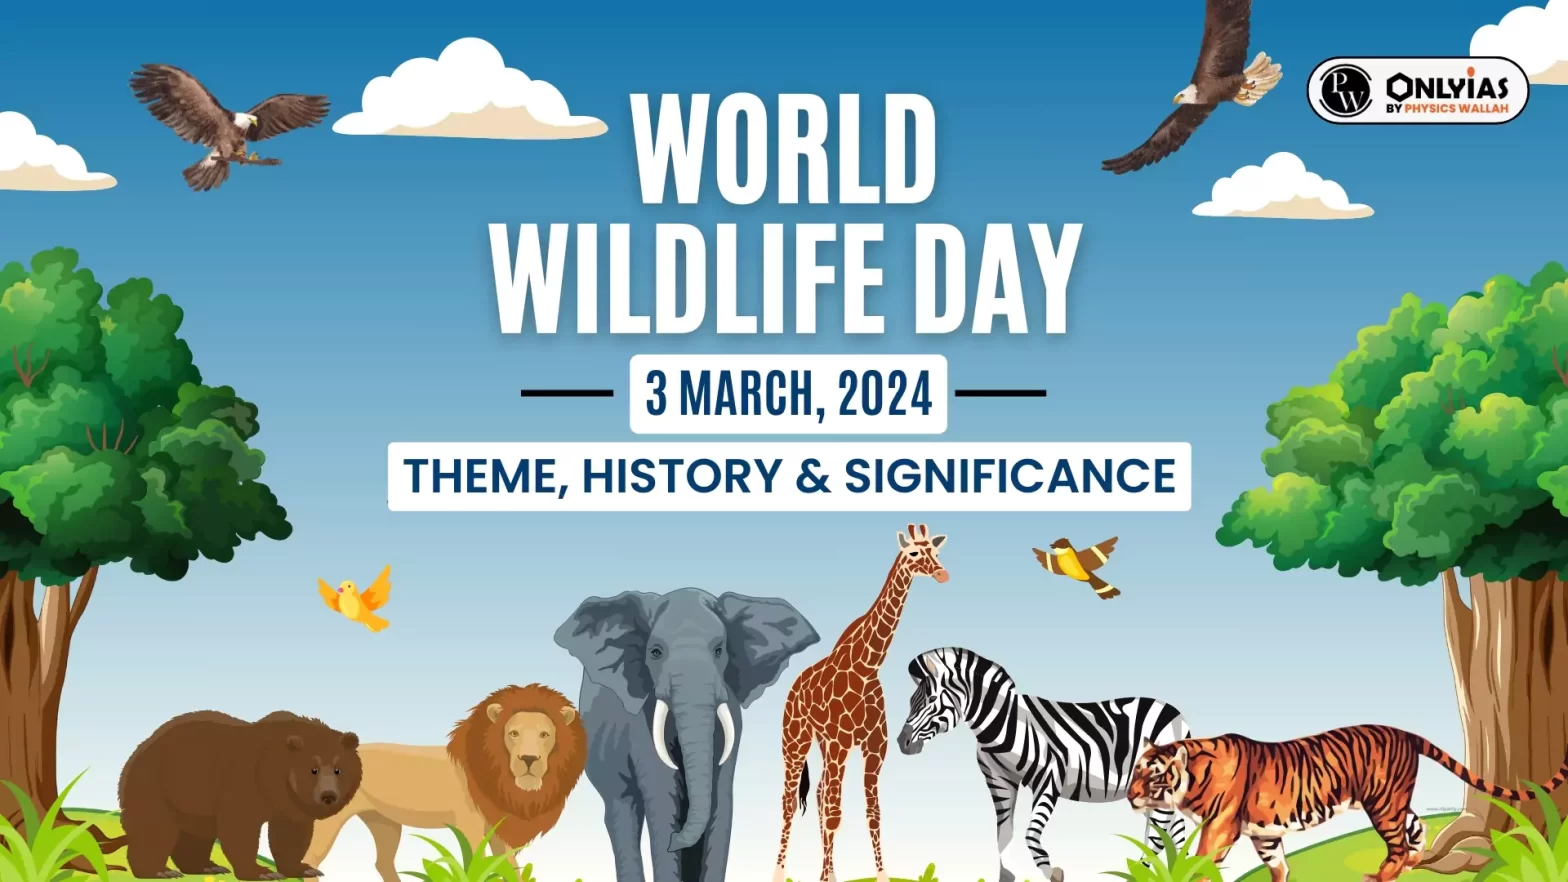 World Wildlife Day 2024: 3rd March, Theme, History & Significance